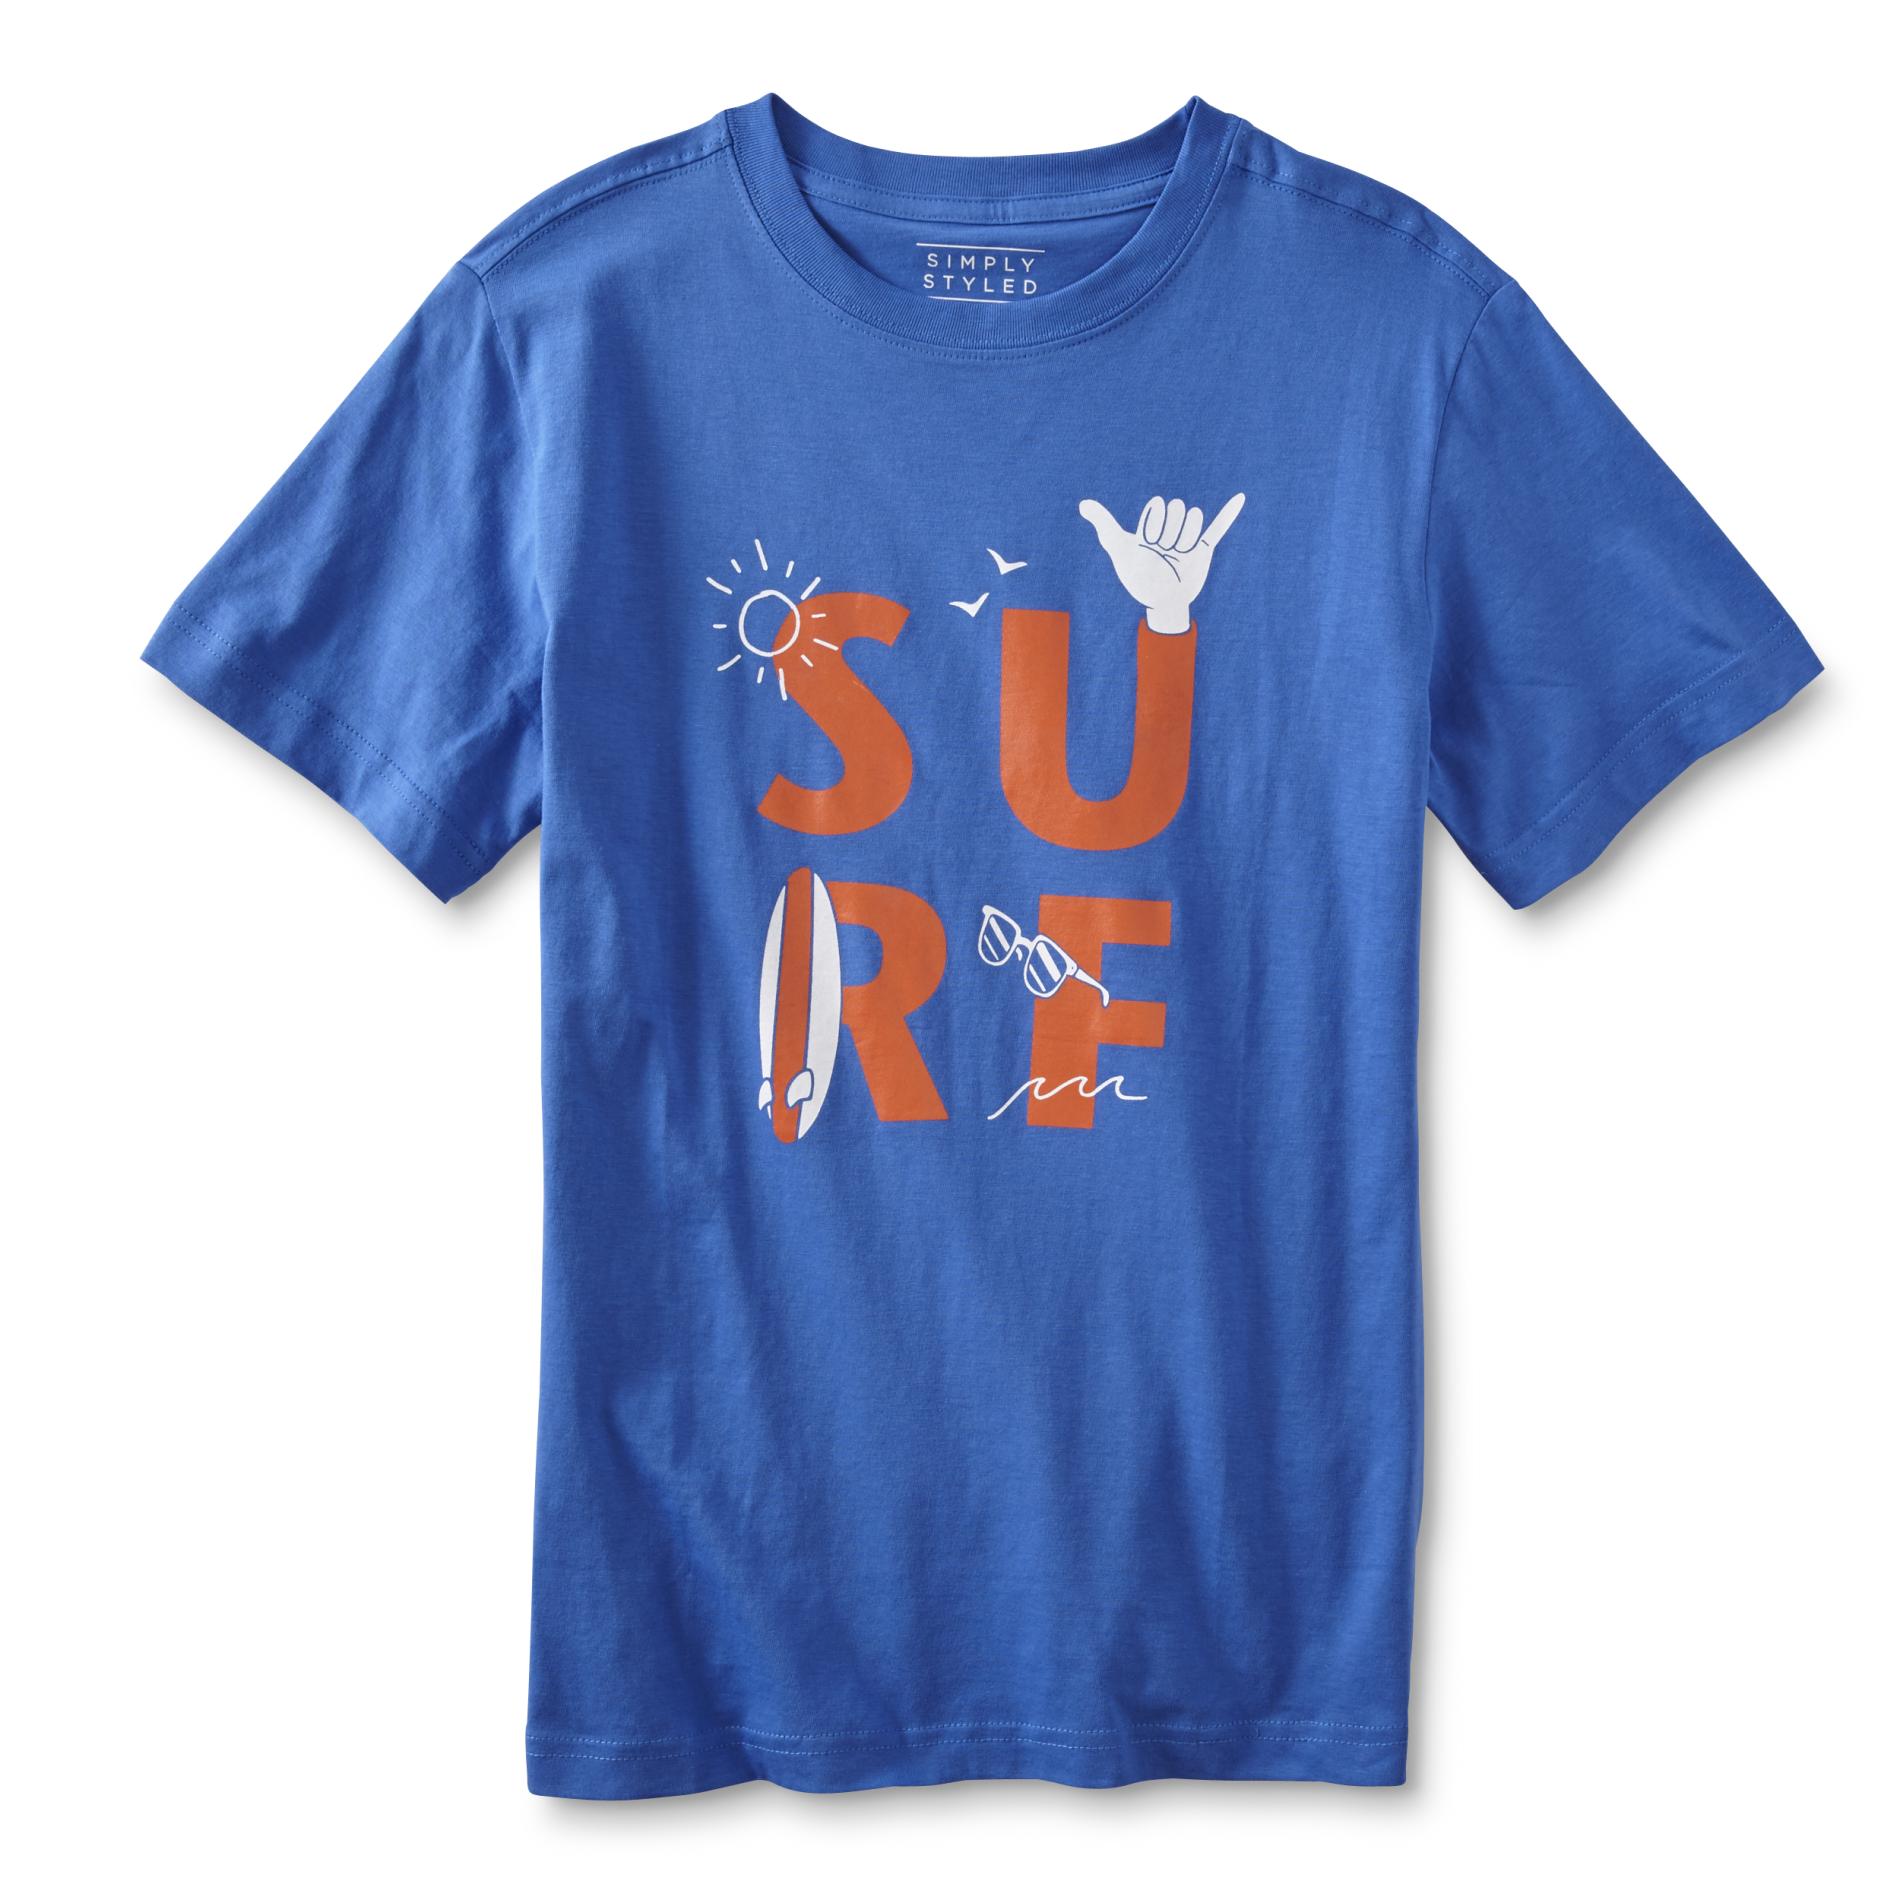 Simply Styled Boys' Graphic T-Shirt - Surf